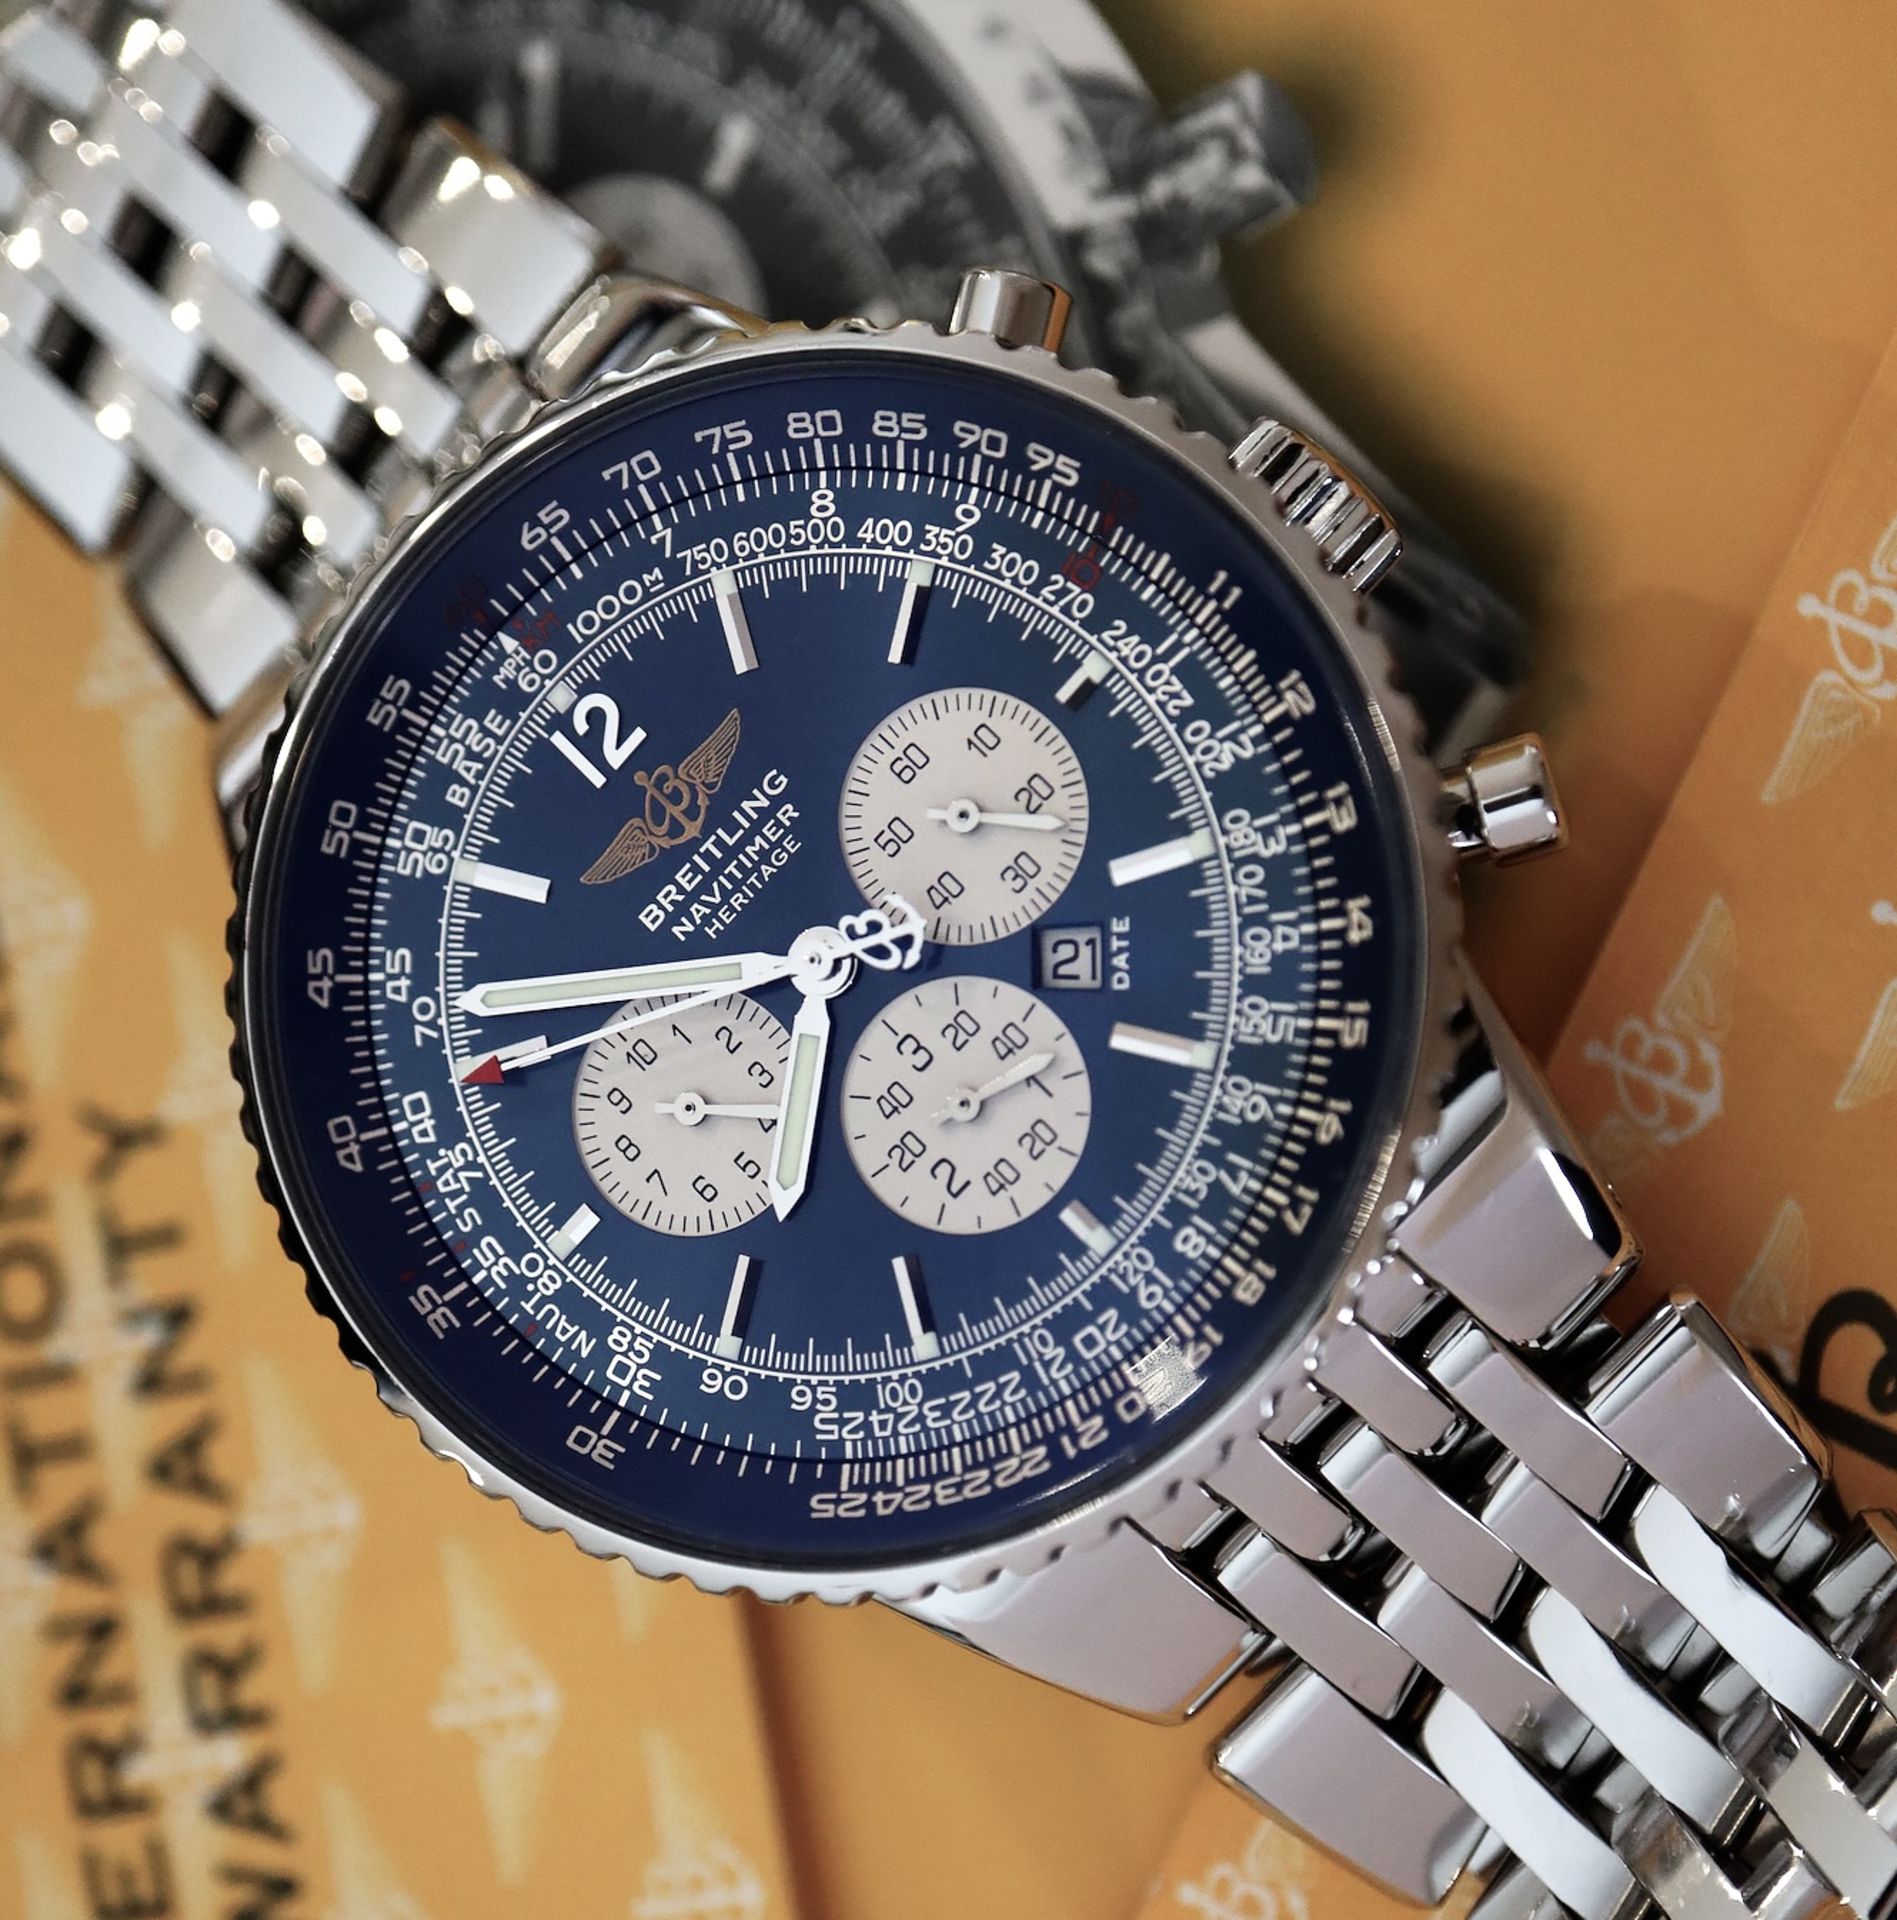 BREITLING NAVITIMER HERITAGE CHRONOGRAPH (REF. A35350) 'FULL SET - BOX, CERTS. ETC.' NAVY DIAL - Image 10 of 16